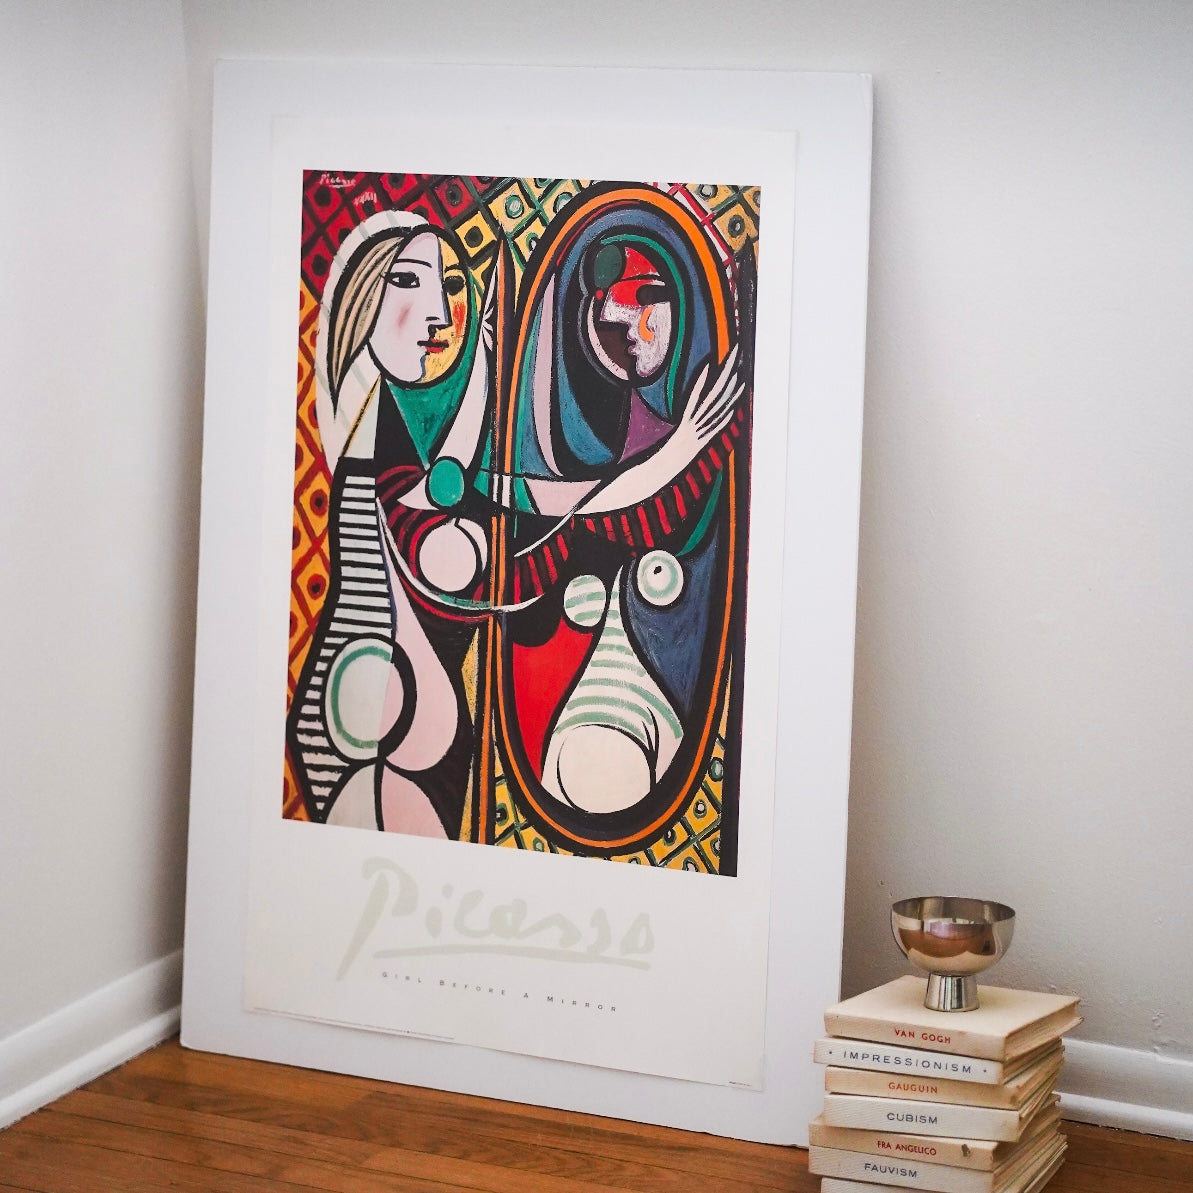 Vintage Picasso “Girl Before a Mirror” Art Poster – GOLDEN